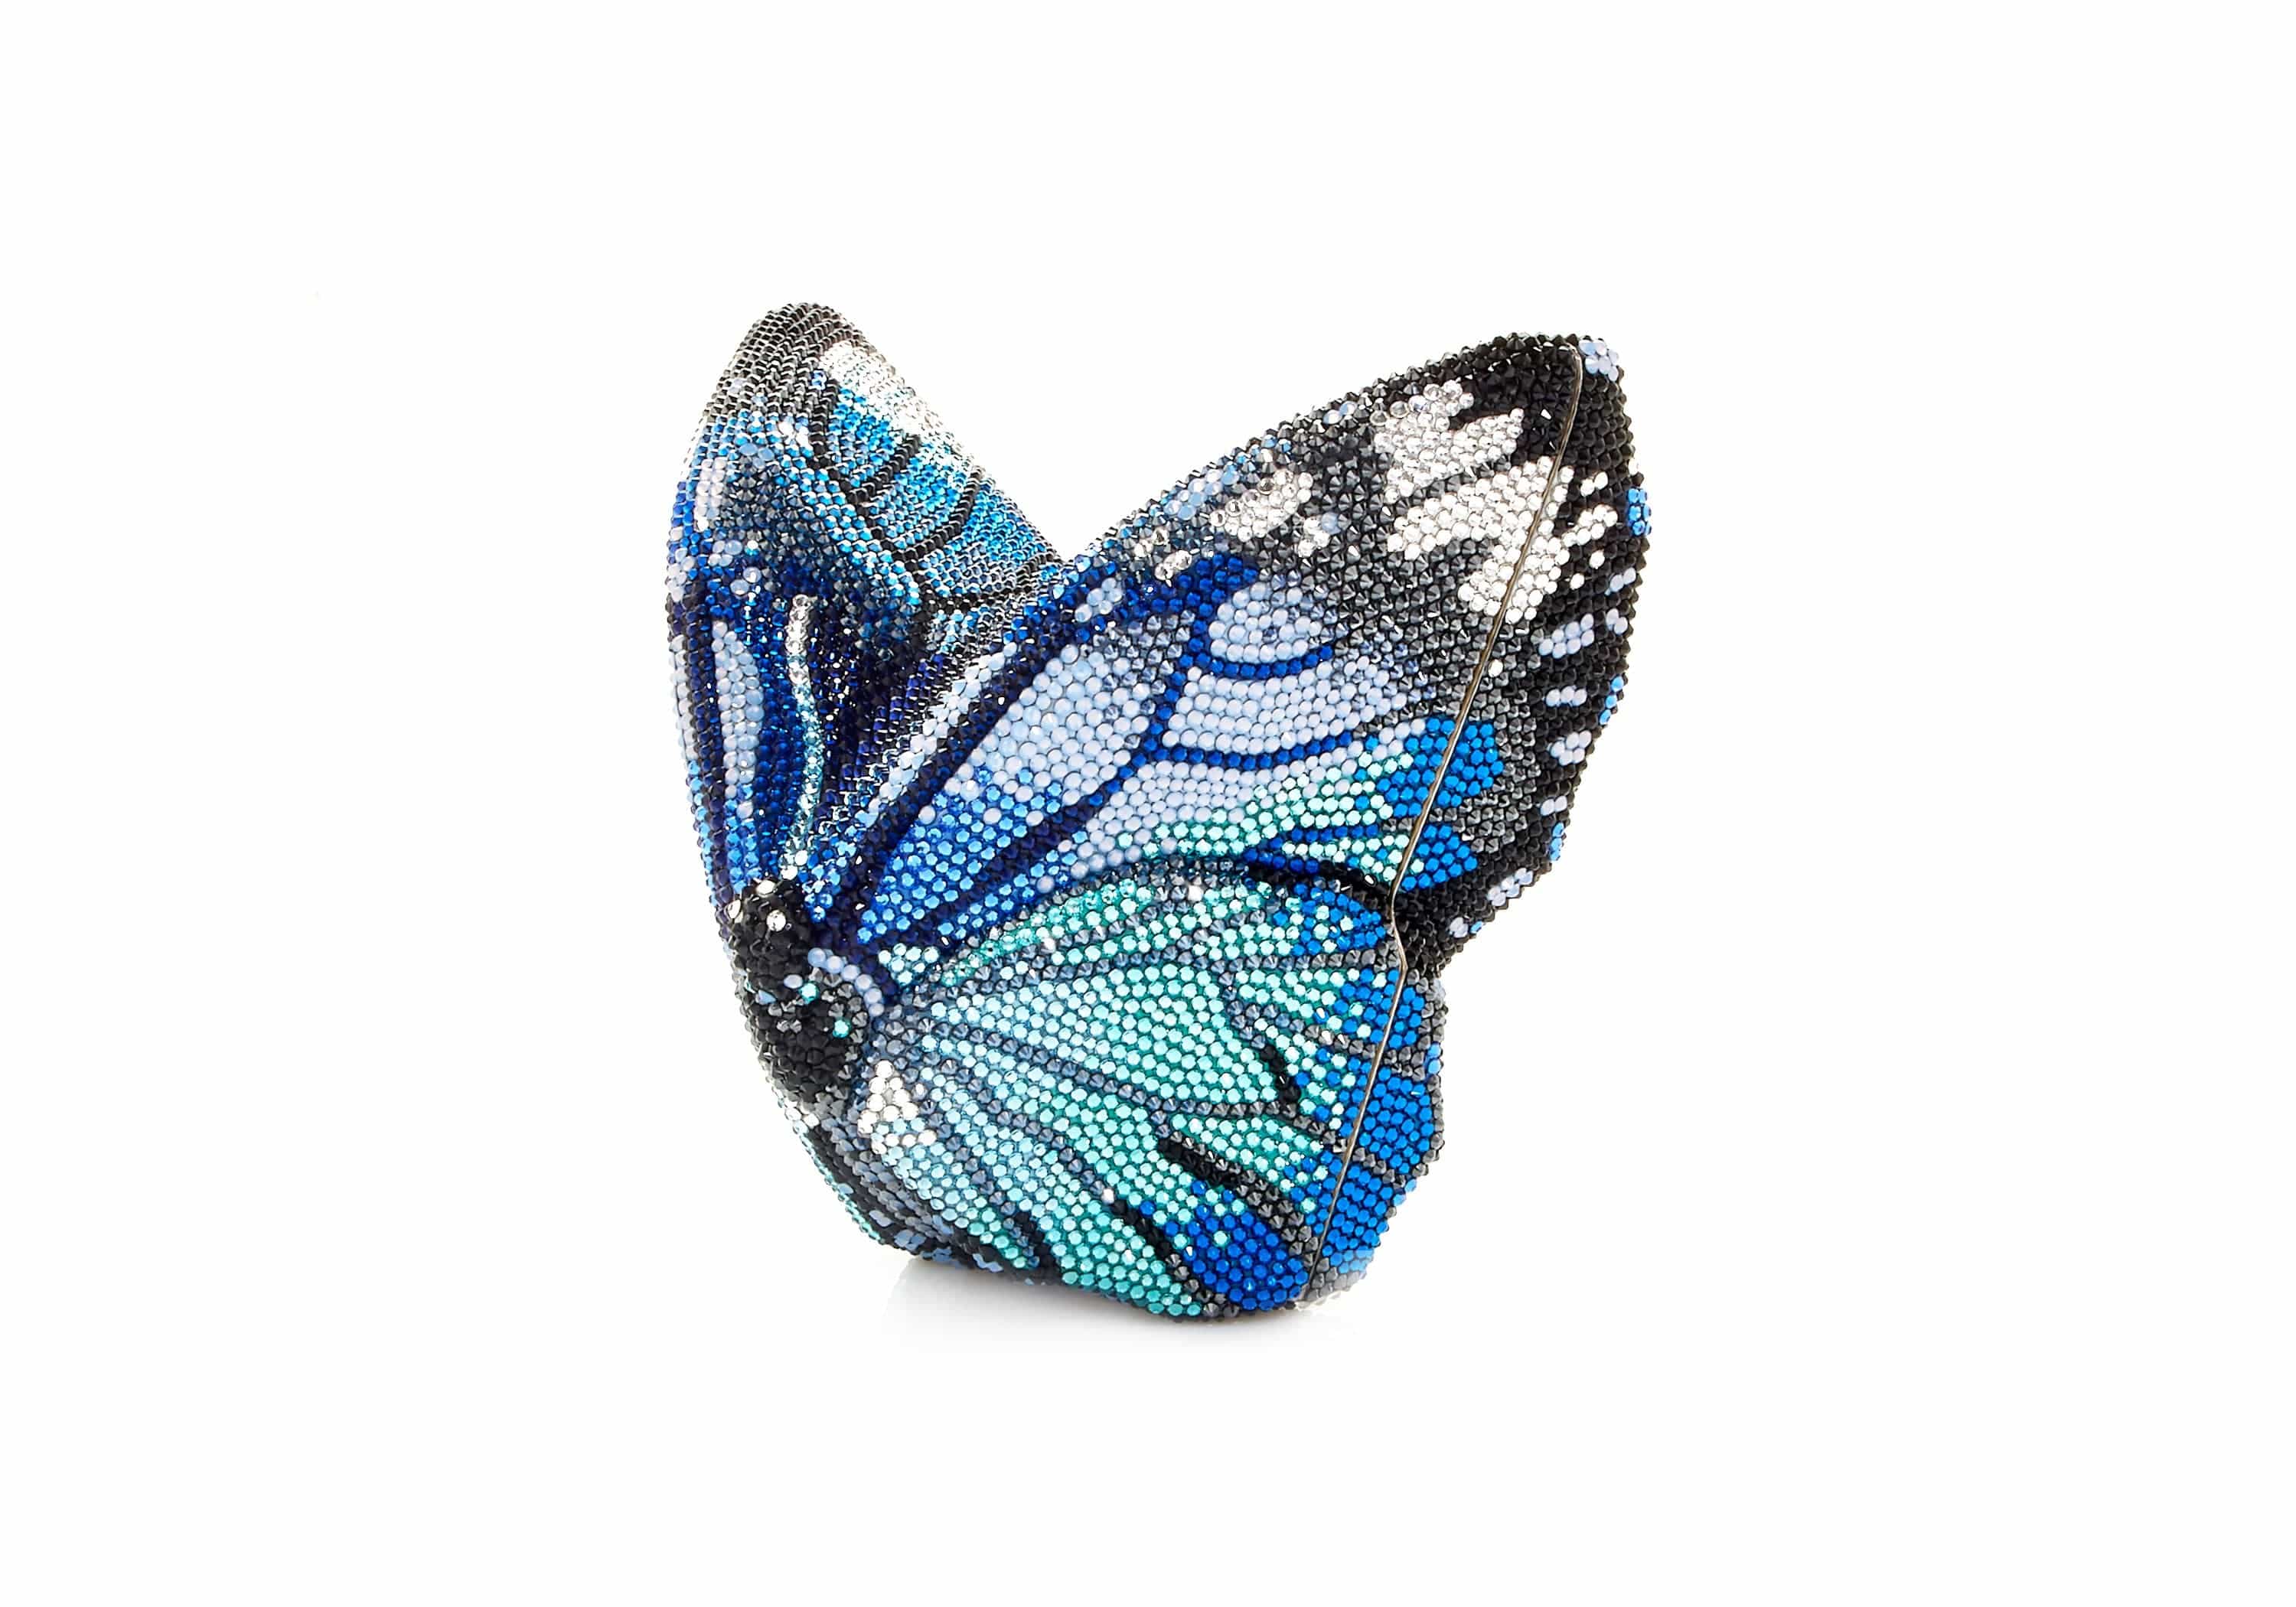 Blue Butterfly by New Vintage Handbags